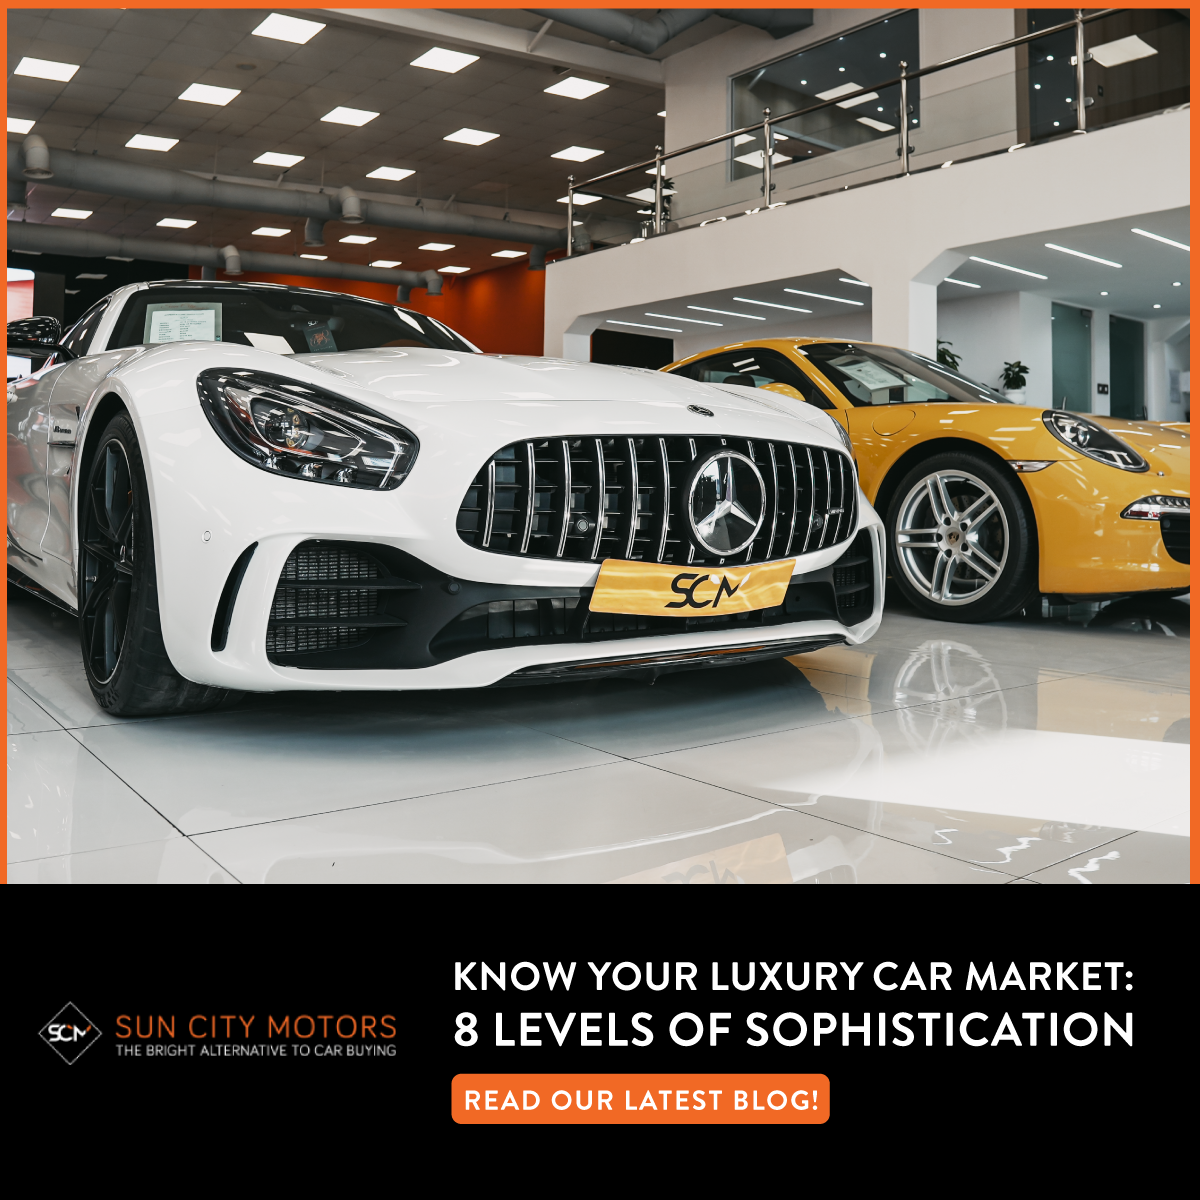 Know Your Luxury Car Market: 8 Levels of Sophistication